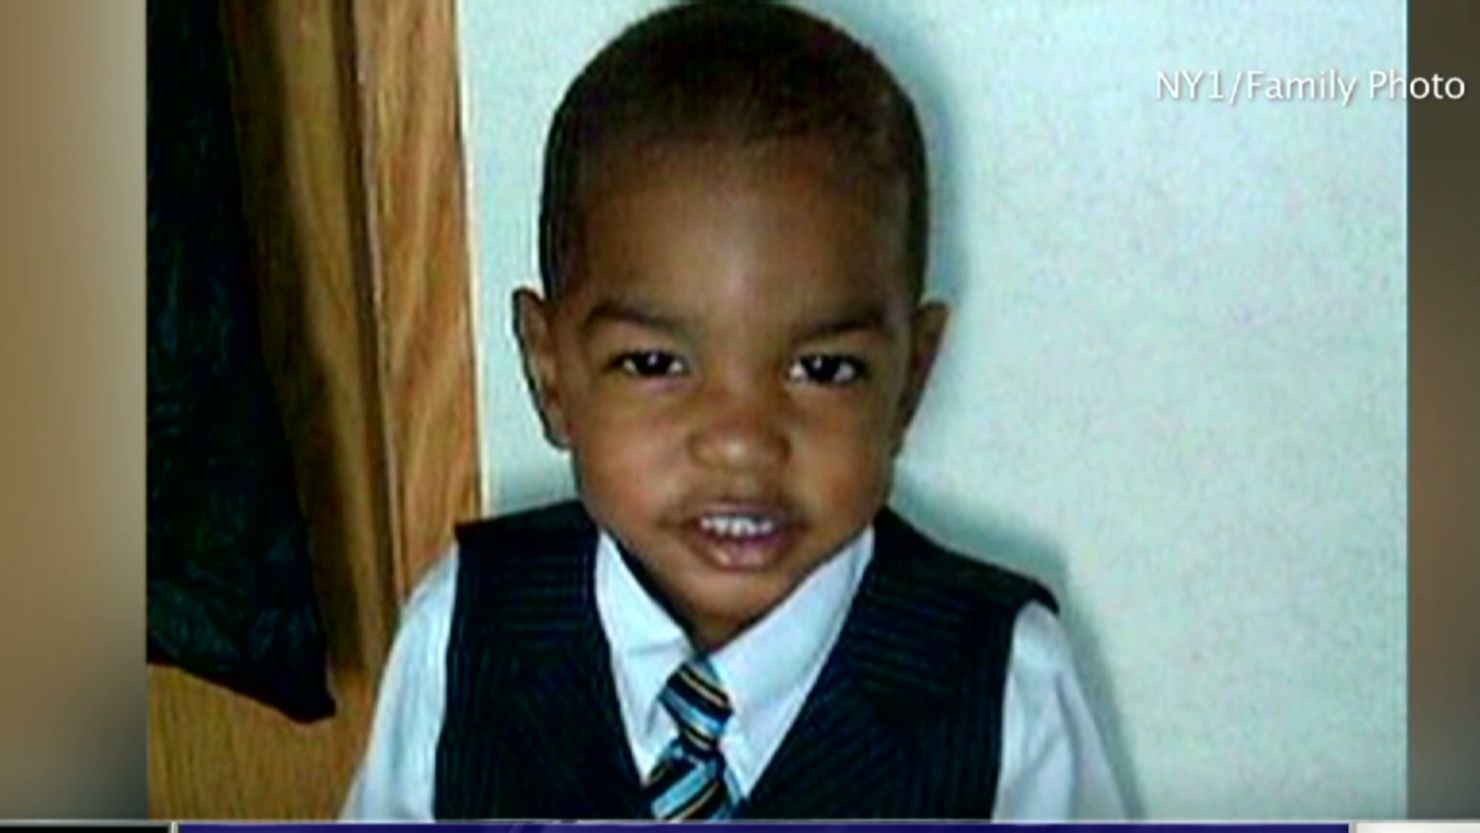 Myls Dobson, 4, was found January 8 unconscious and unresponsive on the floor of a bathroom of a luxury New York high-rise.